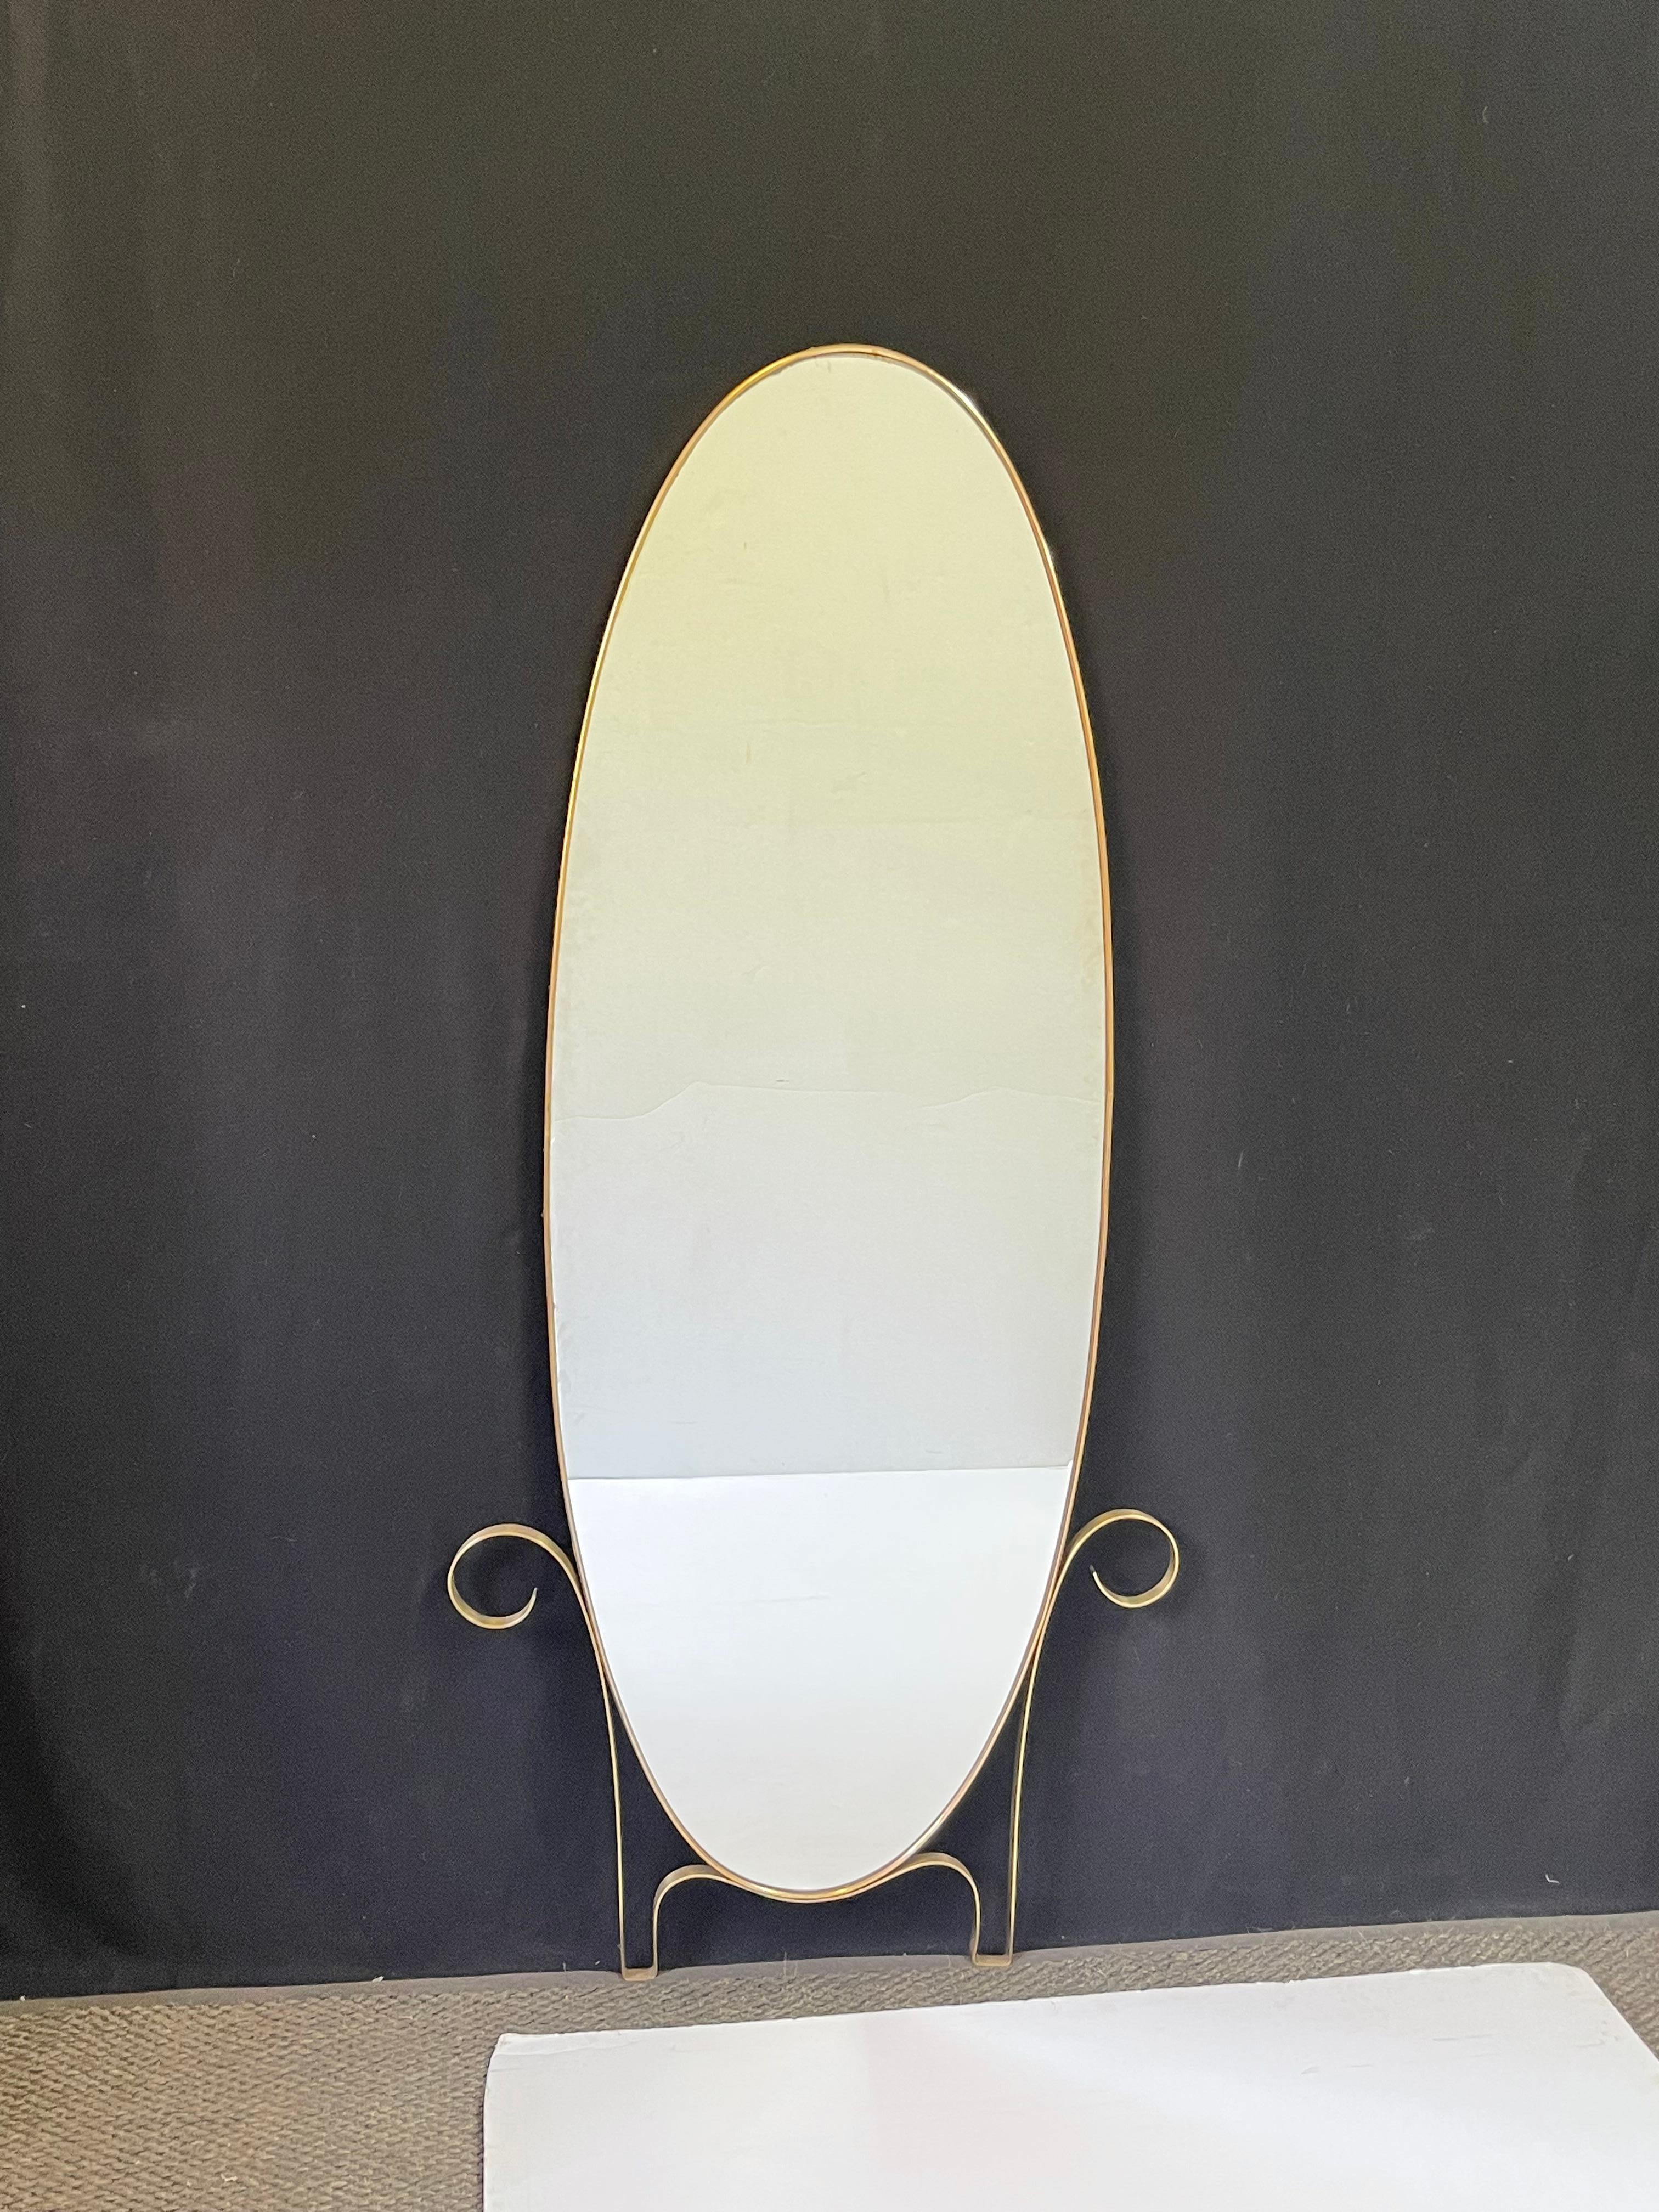 Large mid 20th Century modernist Italian elegantly elongated and tapered wall mirror with a slender oval brass frame. The mirror features a brass detail at its base with a playful upswept scroll. The original mirror-glass and brass frame are in good